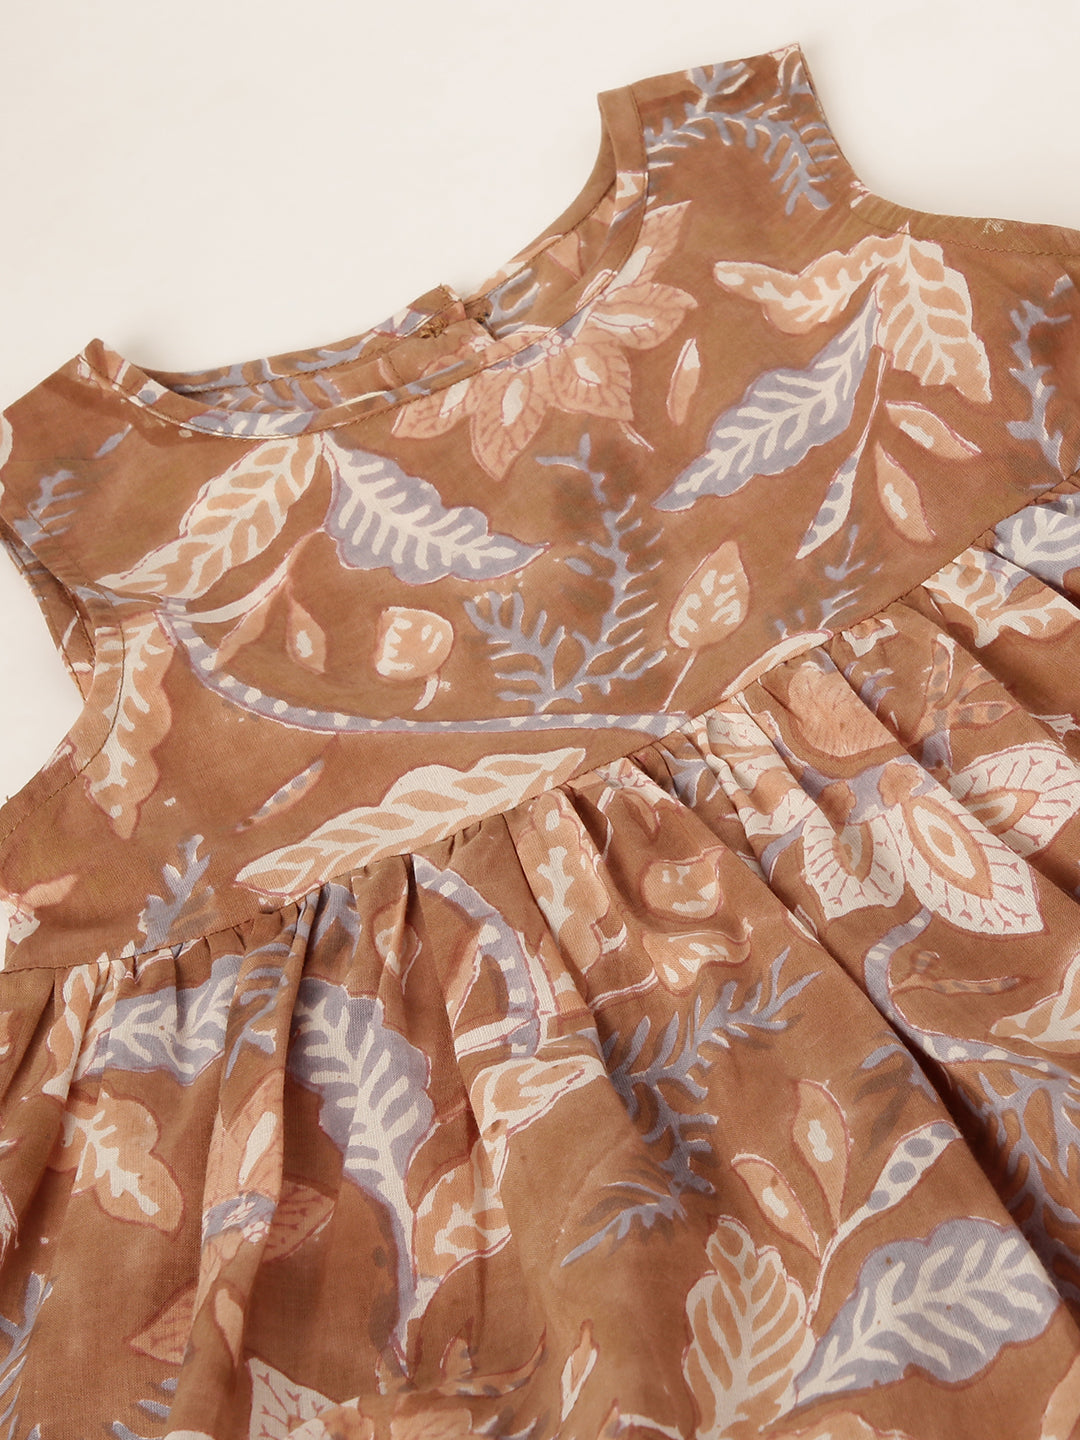 Girls sleeveless dress with Brown and lavender block print. Ages 1-8 years